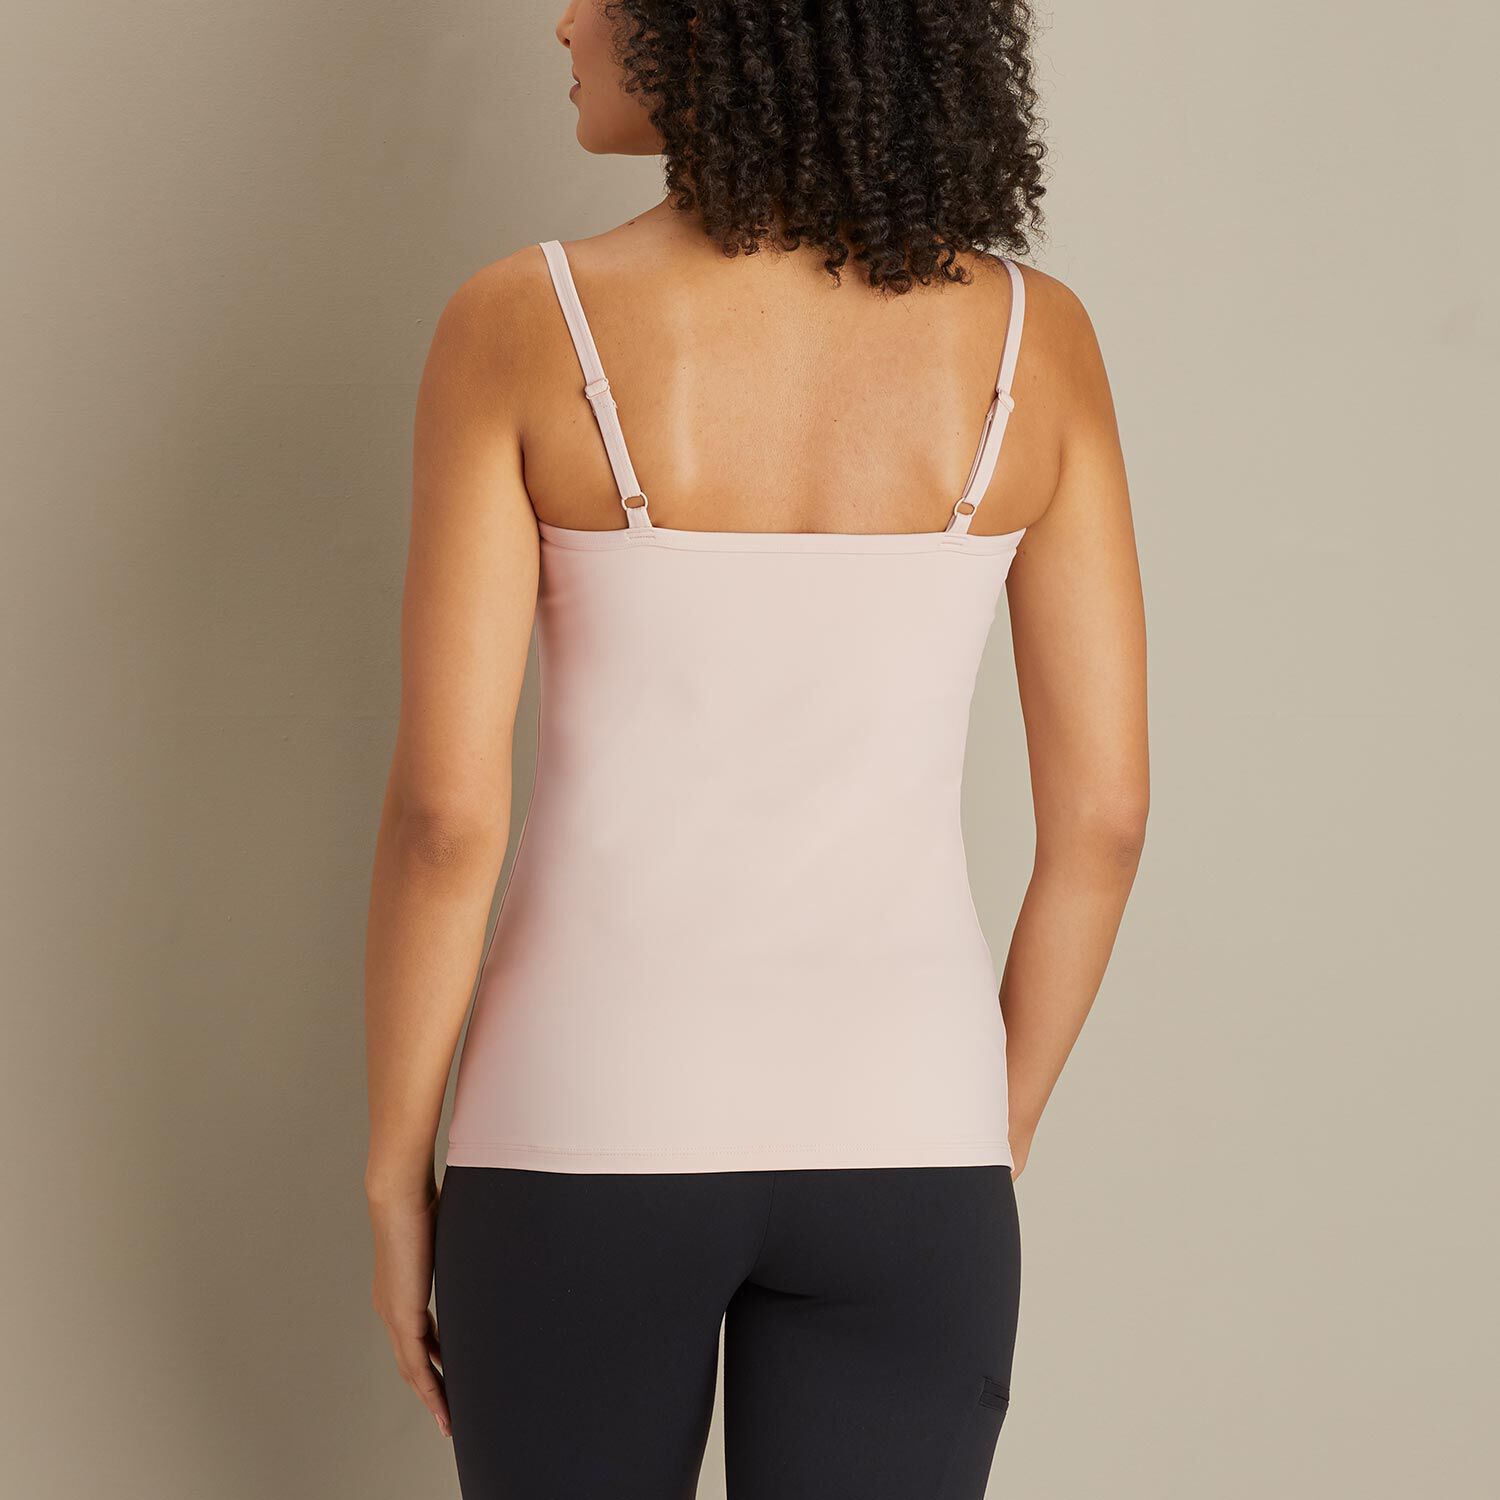 Women's Do Wonders Molded Cup Cami | Duluth Trading Company